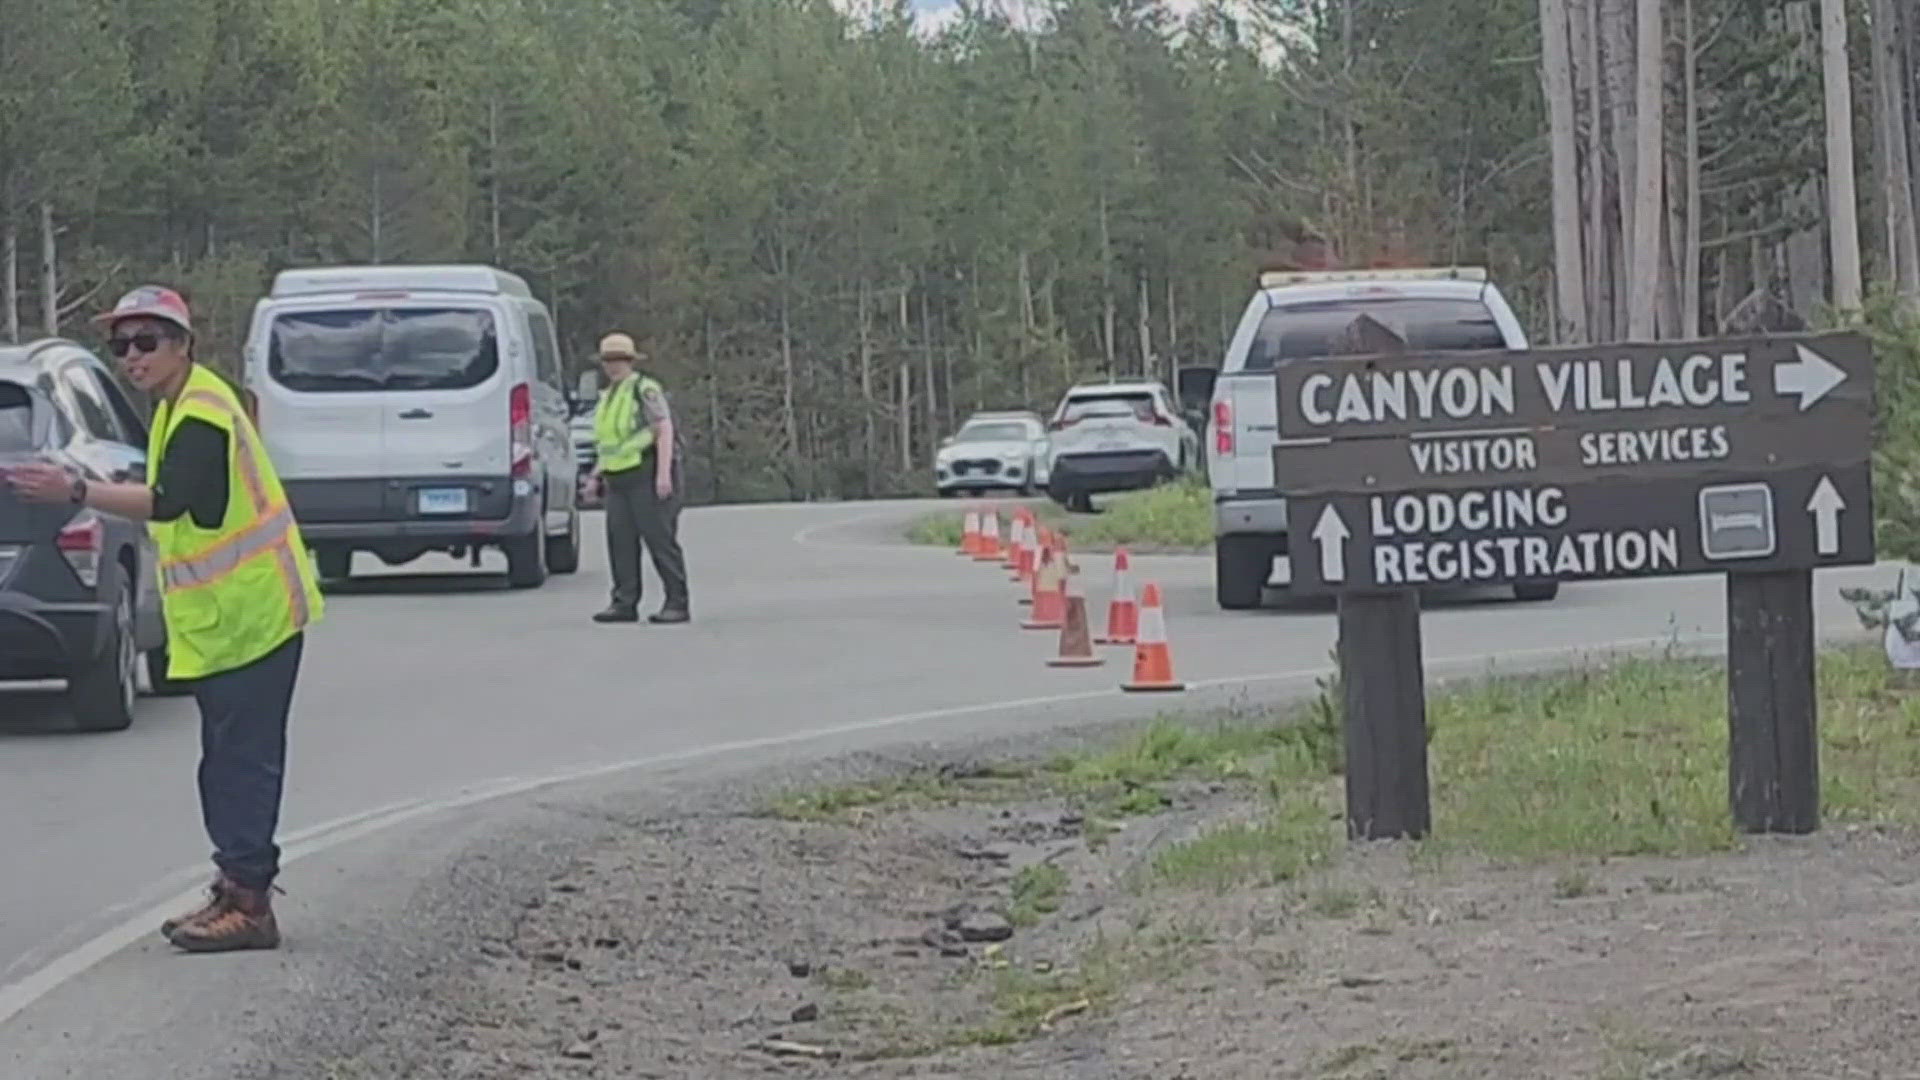 The FBI is investigating the deadly shooting in Canyon Village in Yellowstone National Park in Wyoming.